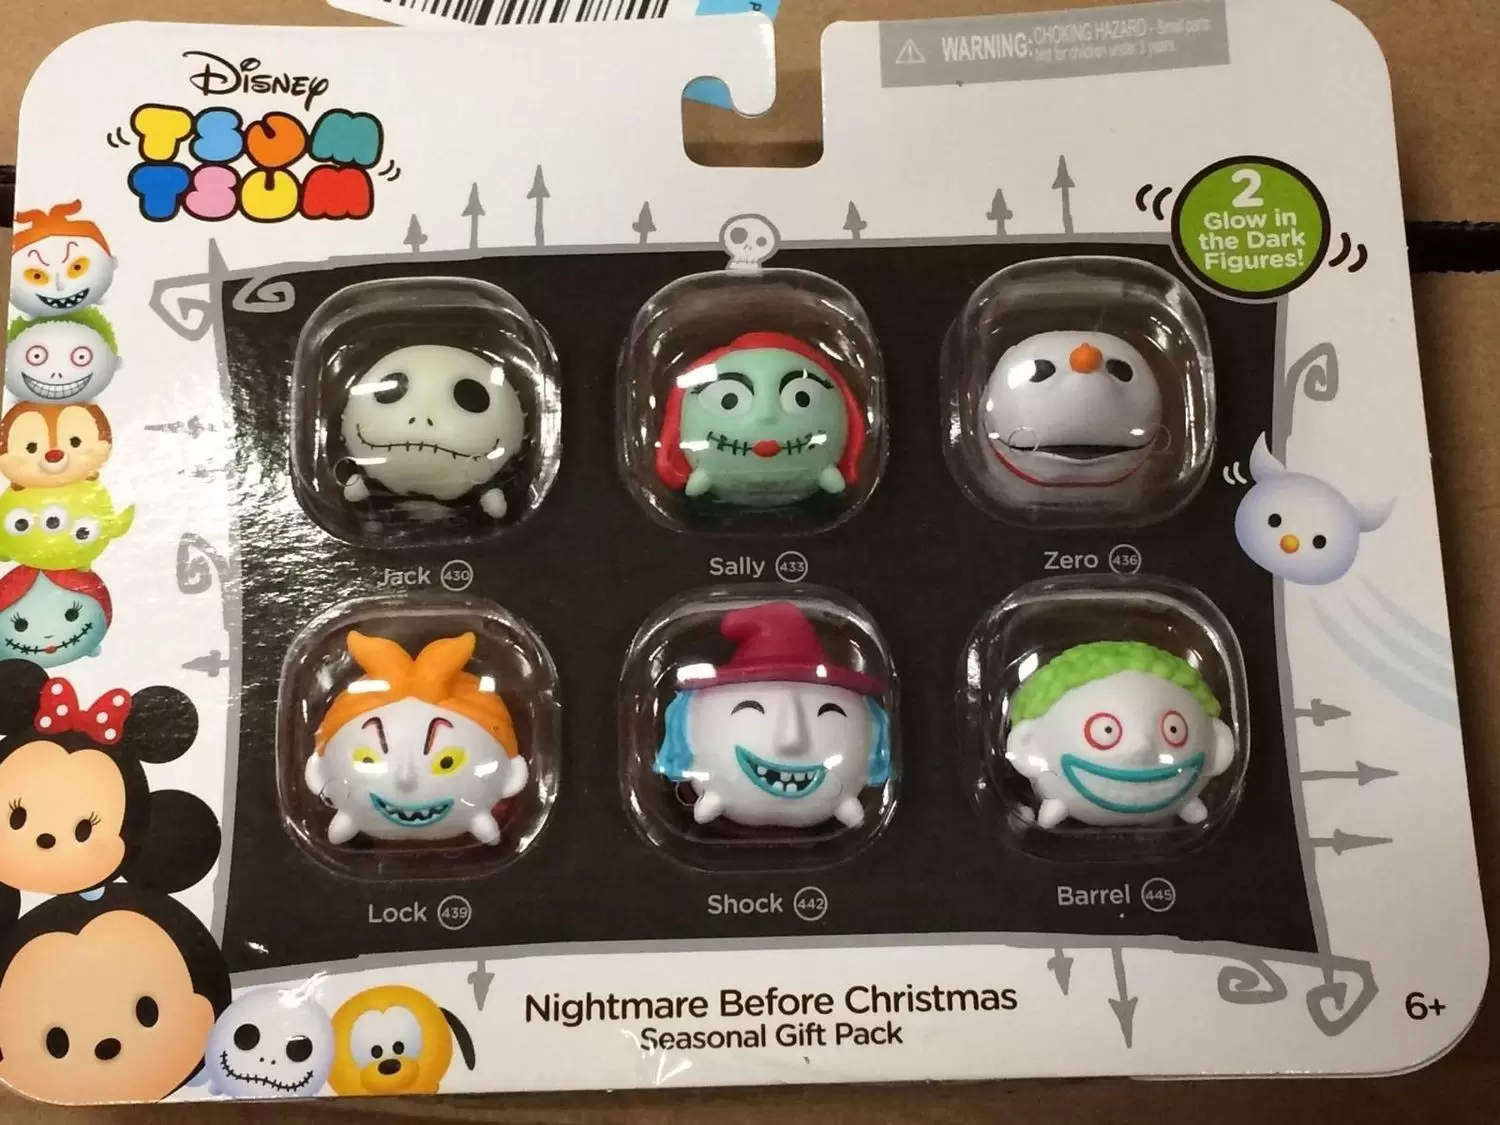 Tsum Tsum Jakks Pacific Exclusives And Sets - Walgreens Exclusive Nightmare Before Christmas Set 6 Pack